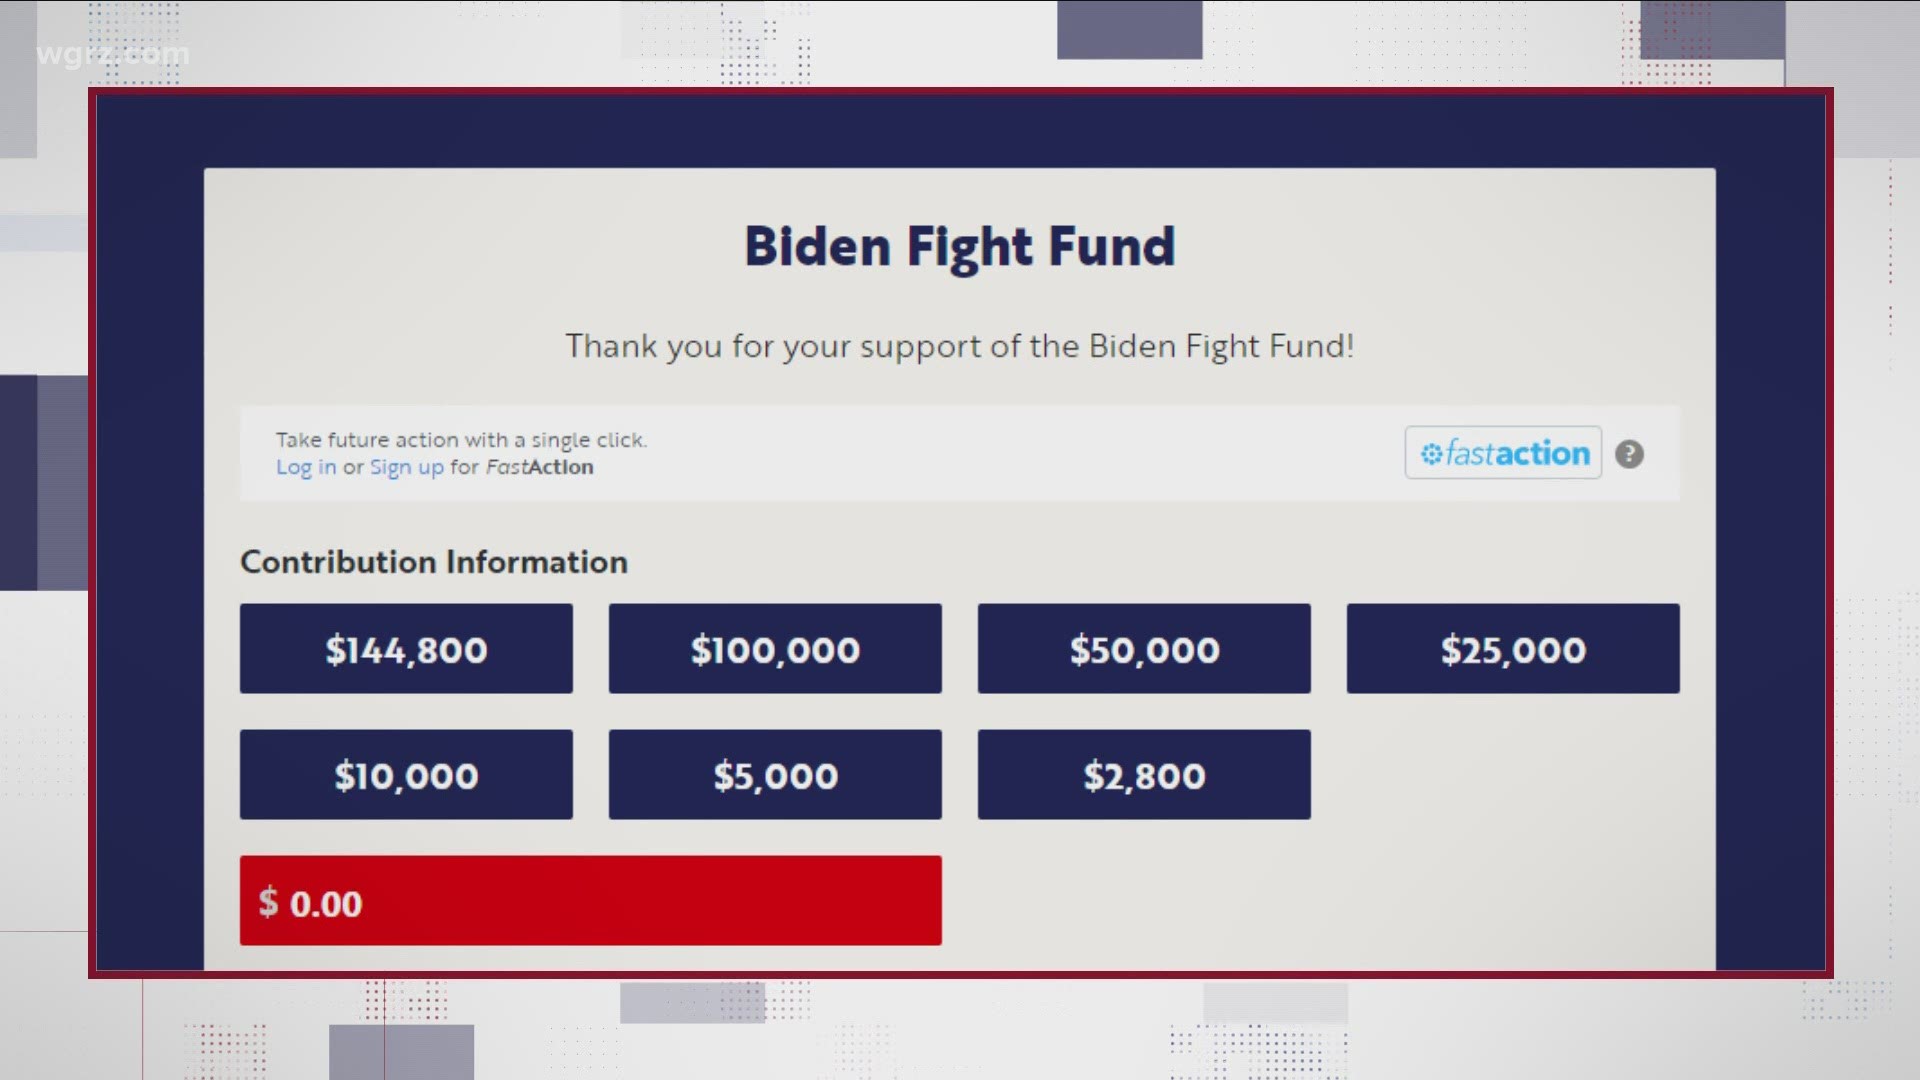 our verify team looks into some fight funds from both candidates